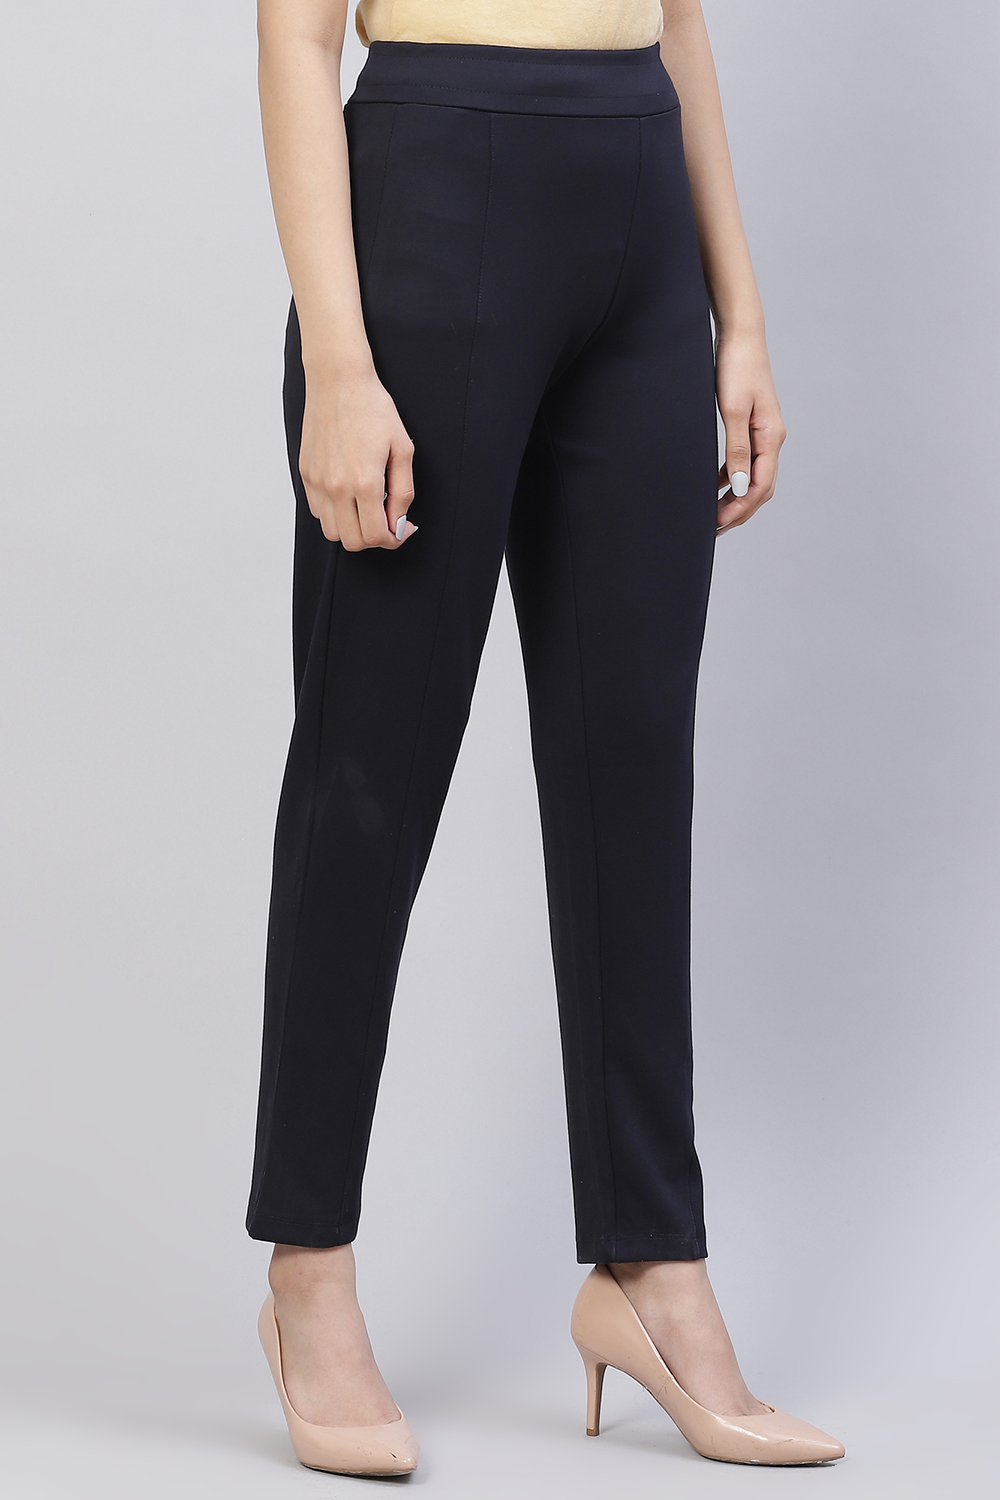 Towny Port Straight Poly Viscose Leggings image number 2